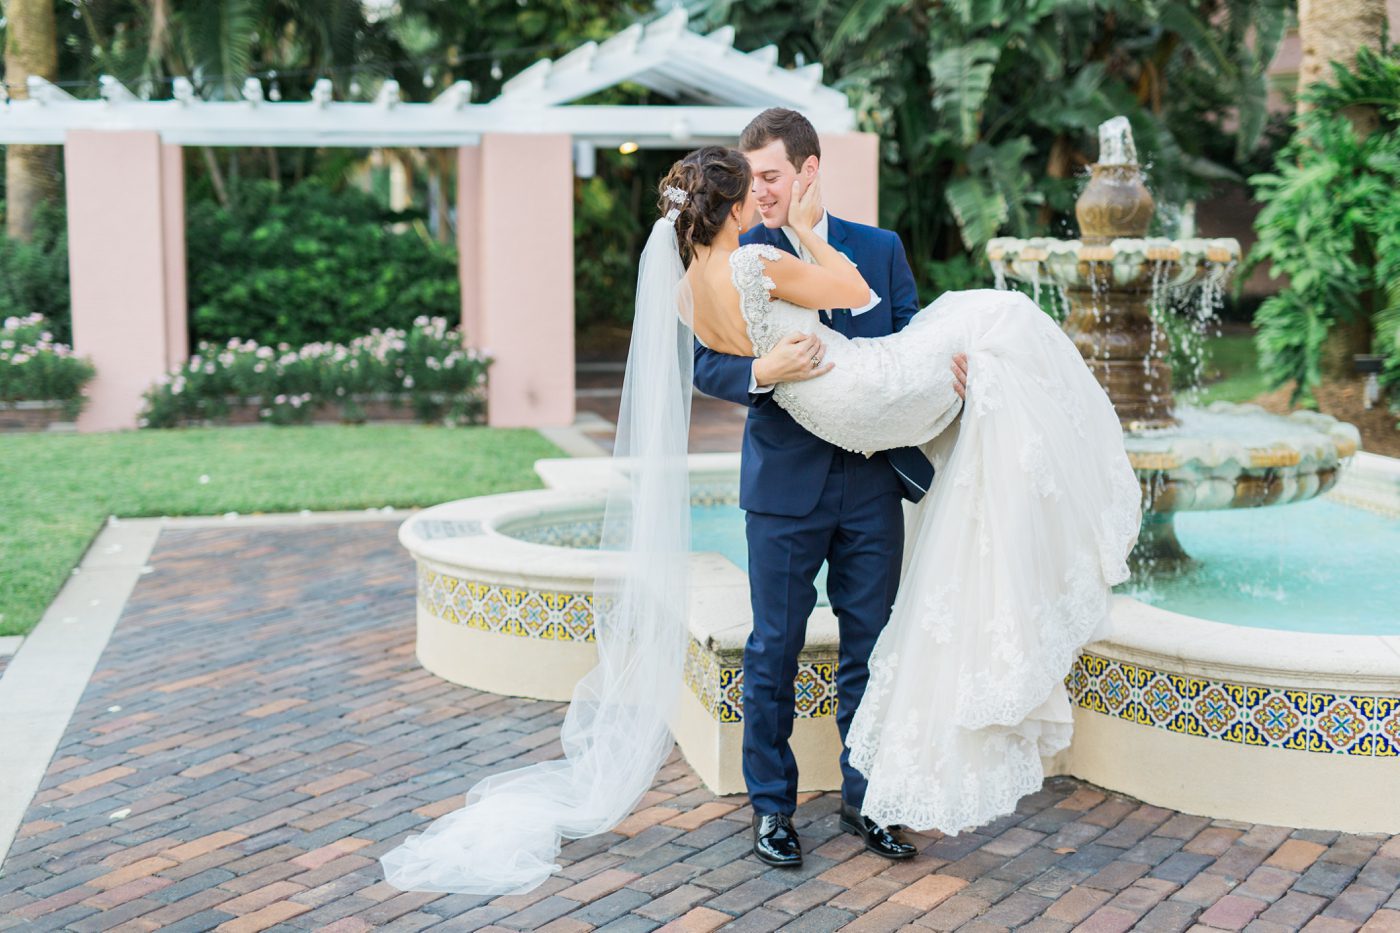 Romantic wedding photo at the Vinoy hotel in St Pete FL by Catherine Ann Photography